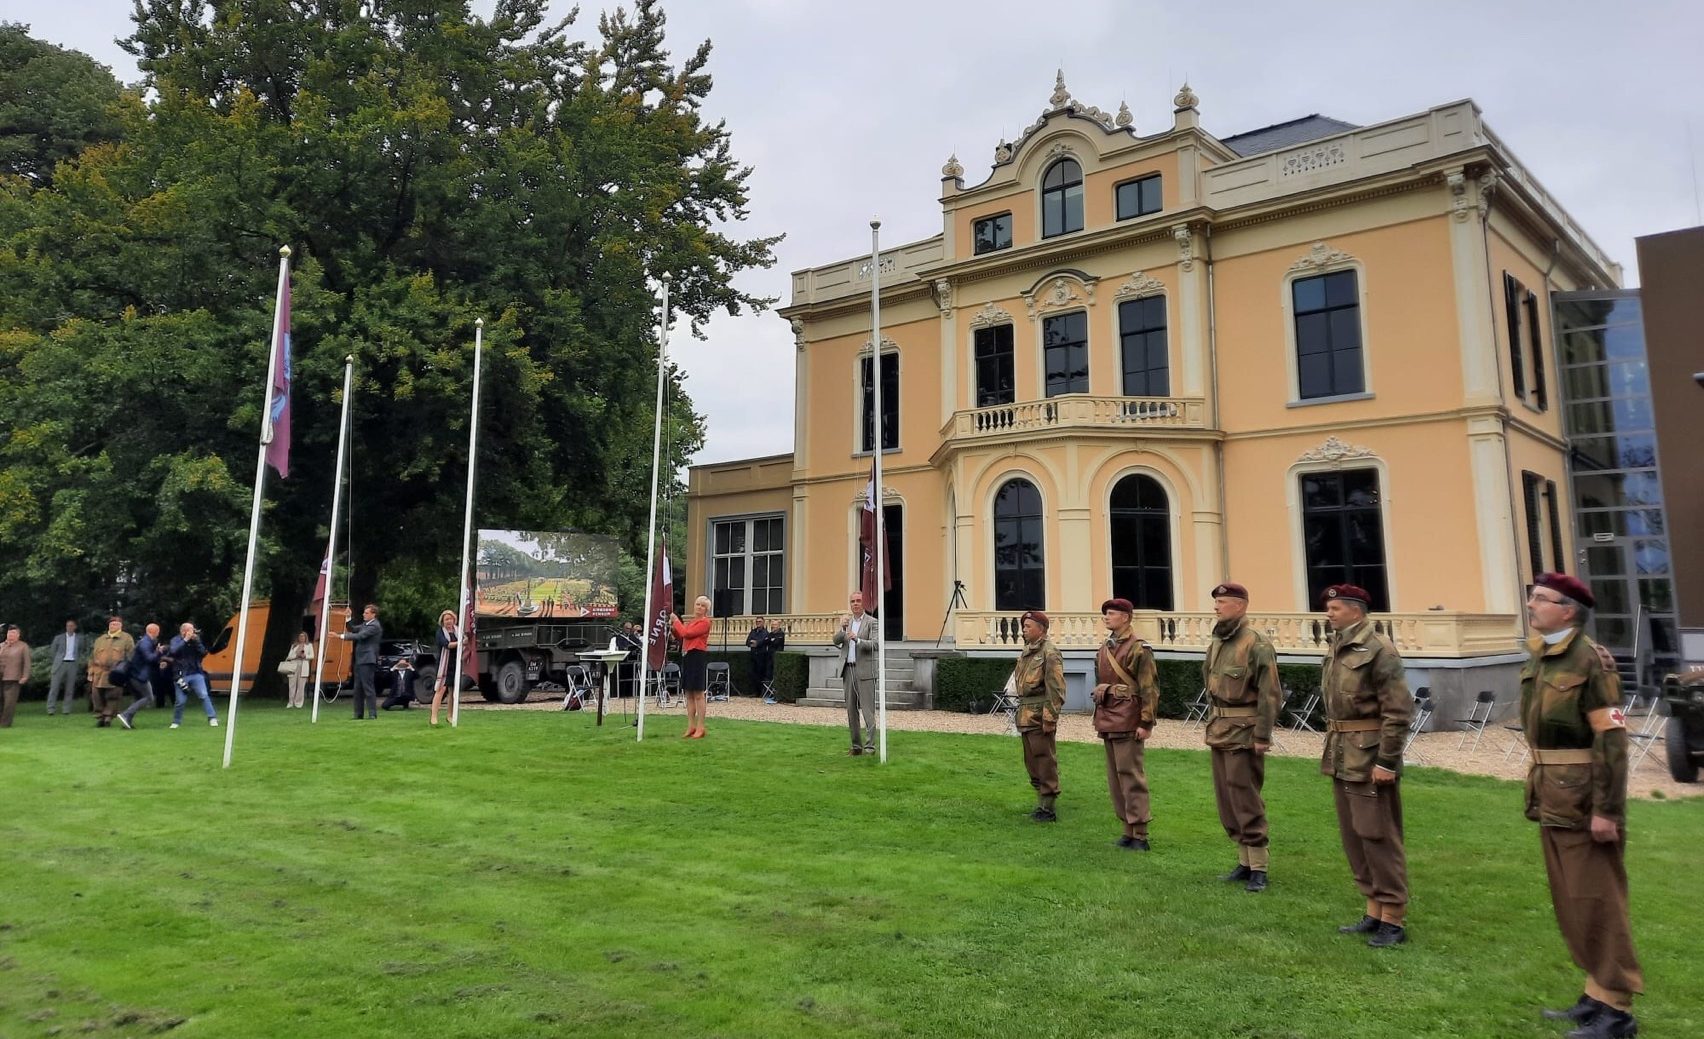 LRE Foundation and the Airborne Region present 4 new routes to commemorate Operation Market Garden